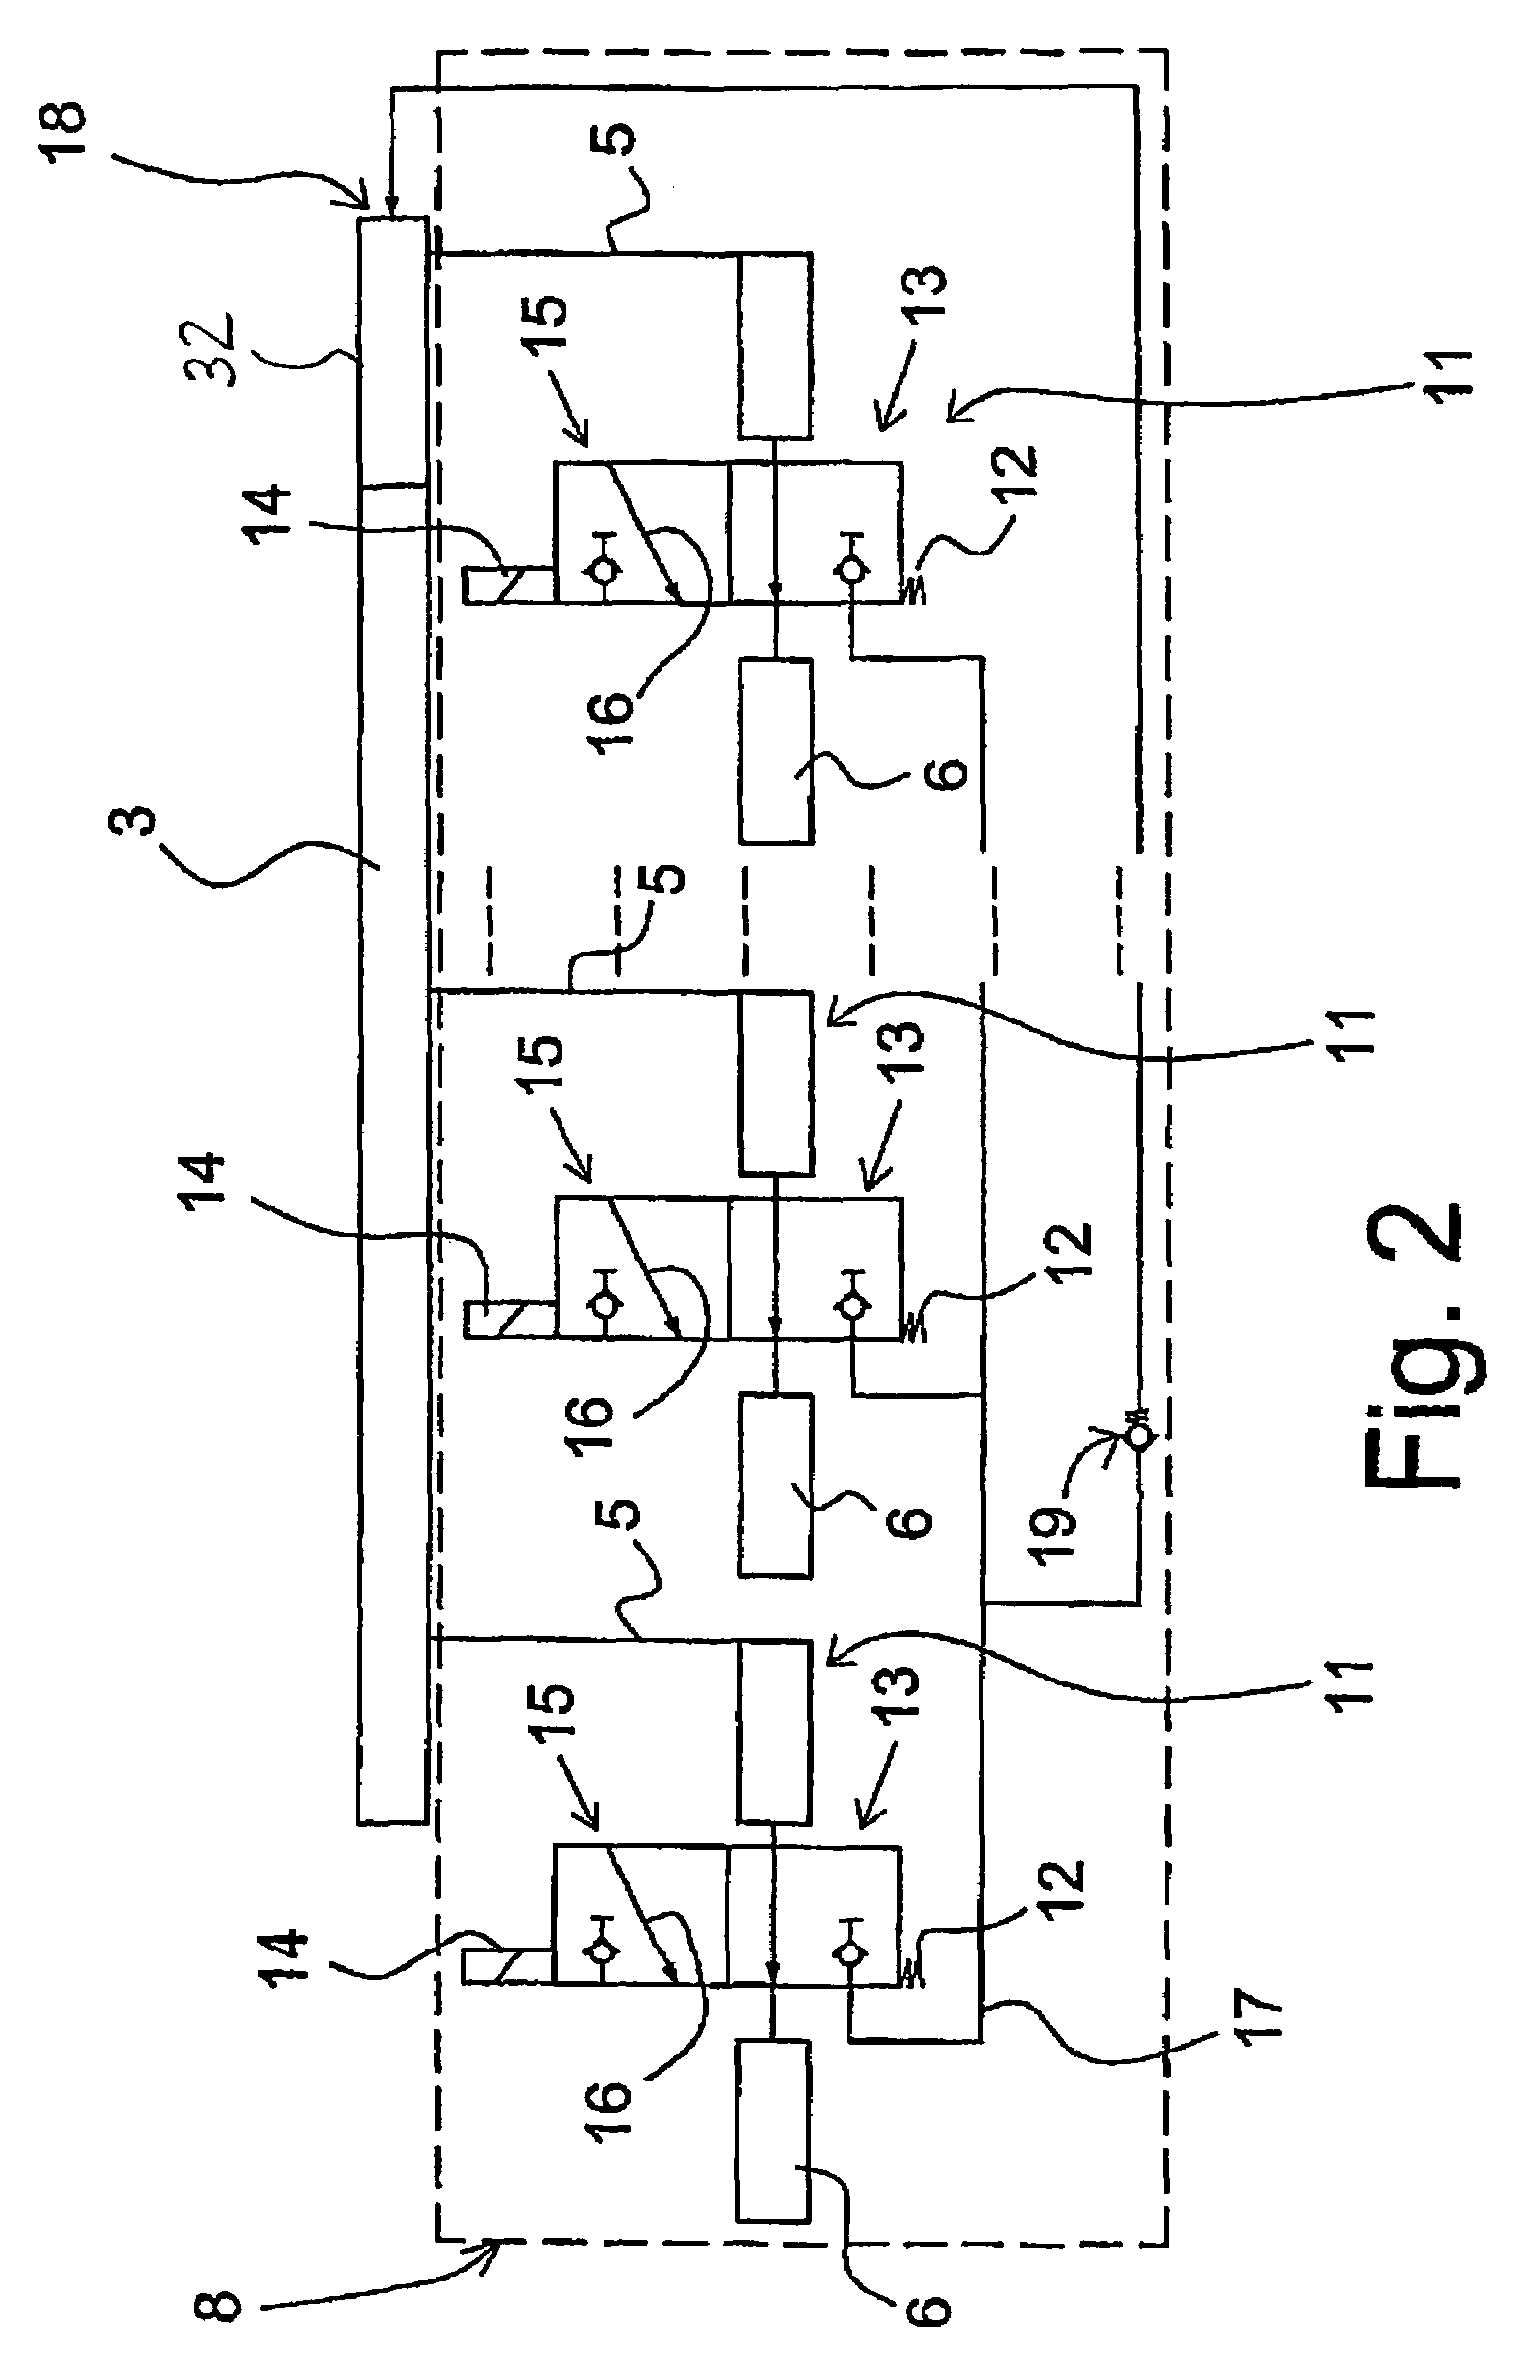 Method and apparatus for lubricating cylinder surface in large diesel engines